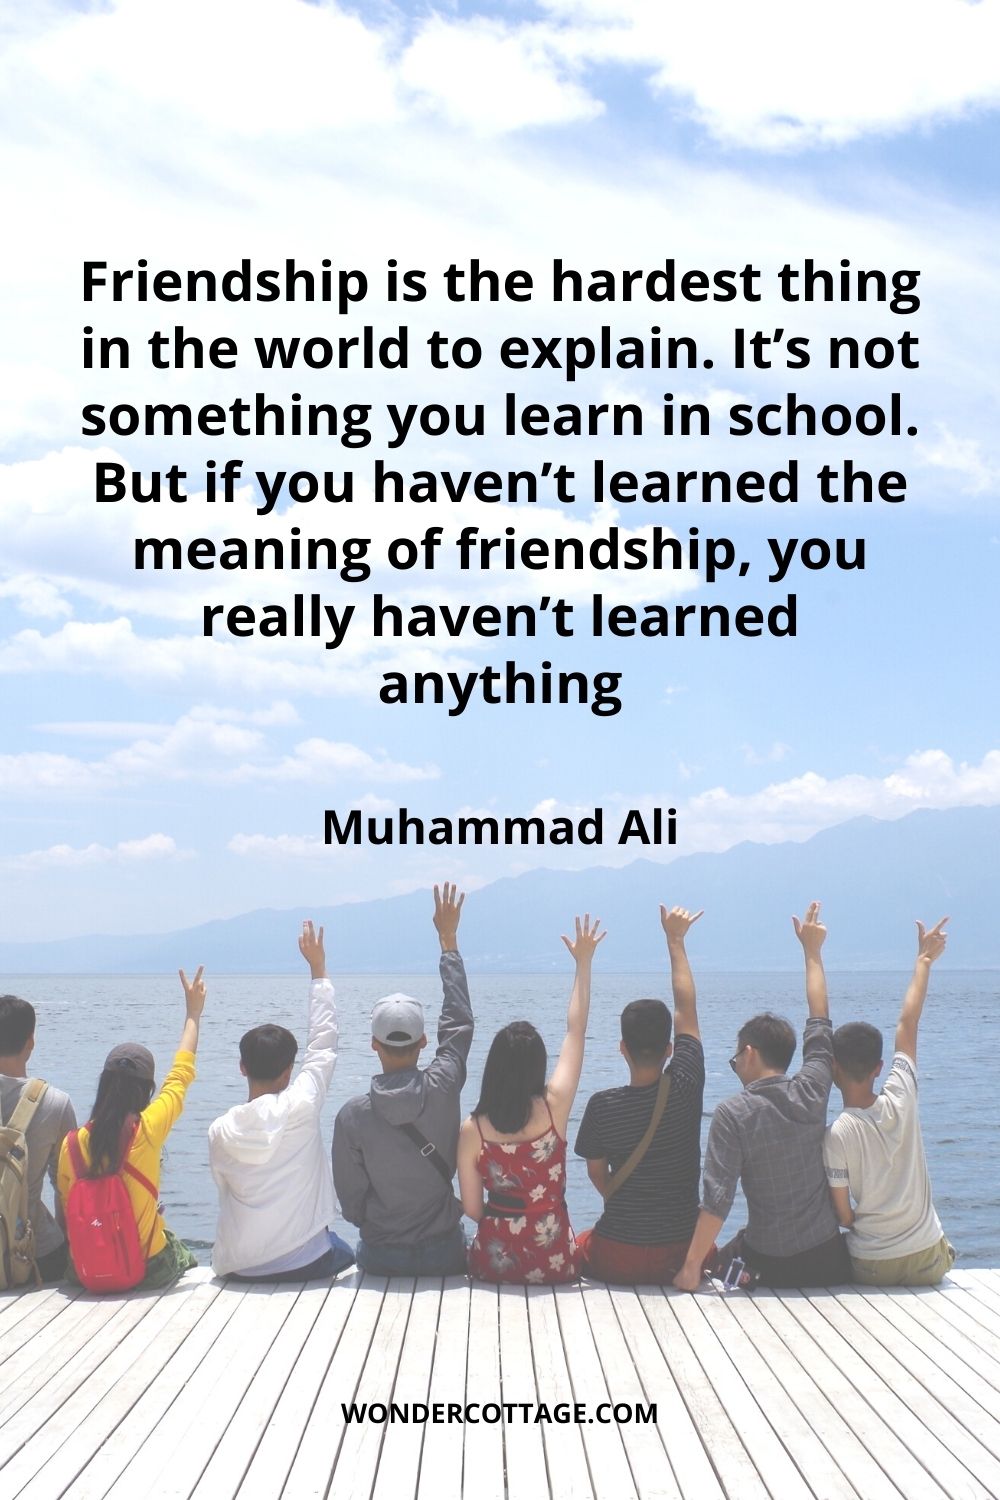 Friendship is the hardest thing in the world to explain. It’s not something you learn in school. But if you haven’t learned the meaning of friendship, you really haven’t learned anything